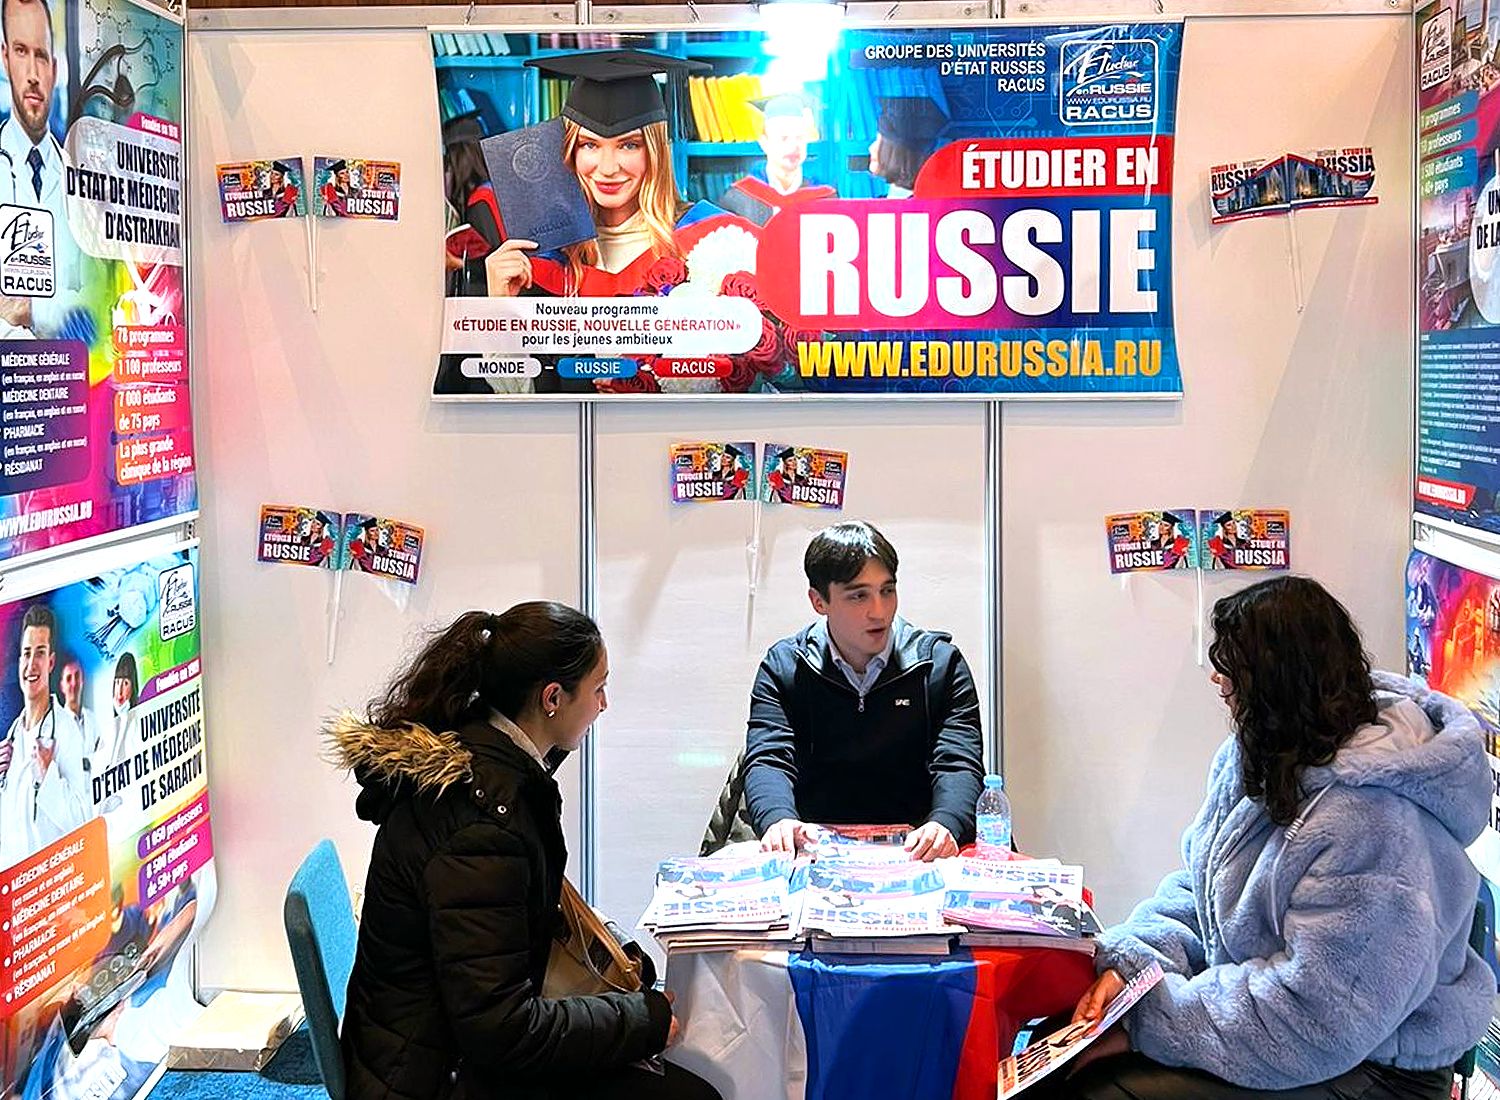 ADMISSION IS OPEN! You can apply for studies on the website WWW.EDURUSSIA.RU Watch our short videos on the YouTube channel "RACUS RUSSIA" and see how great it is to study in Russia!